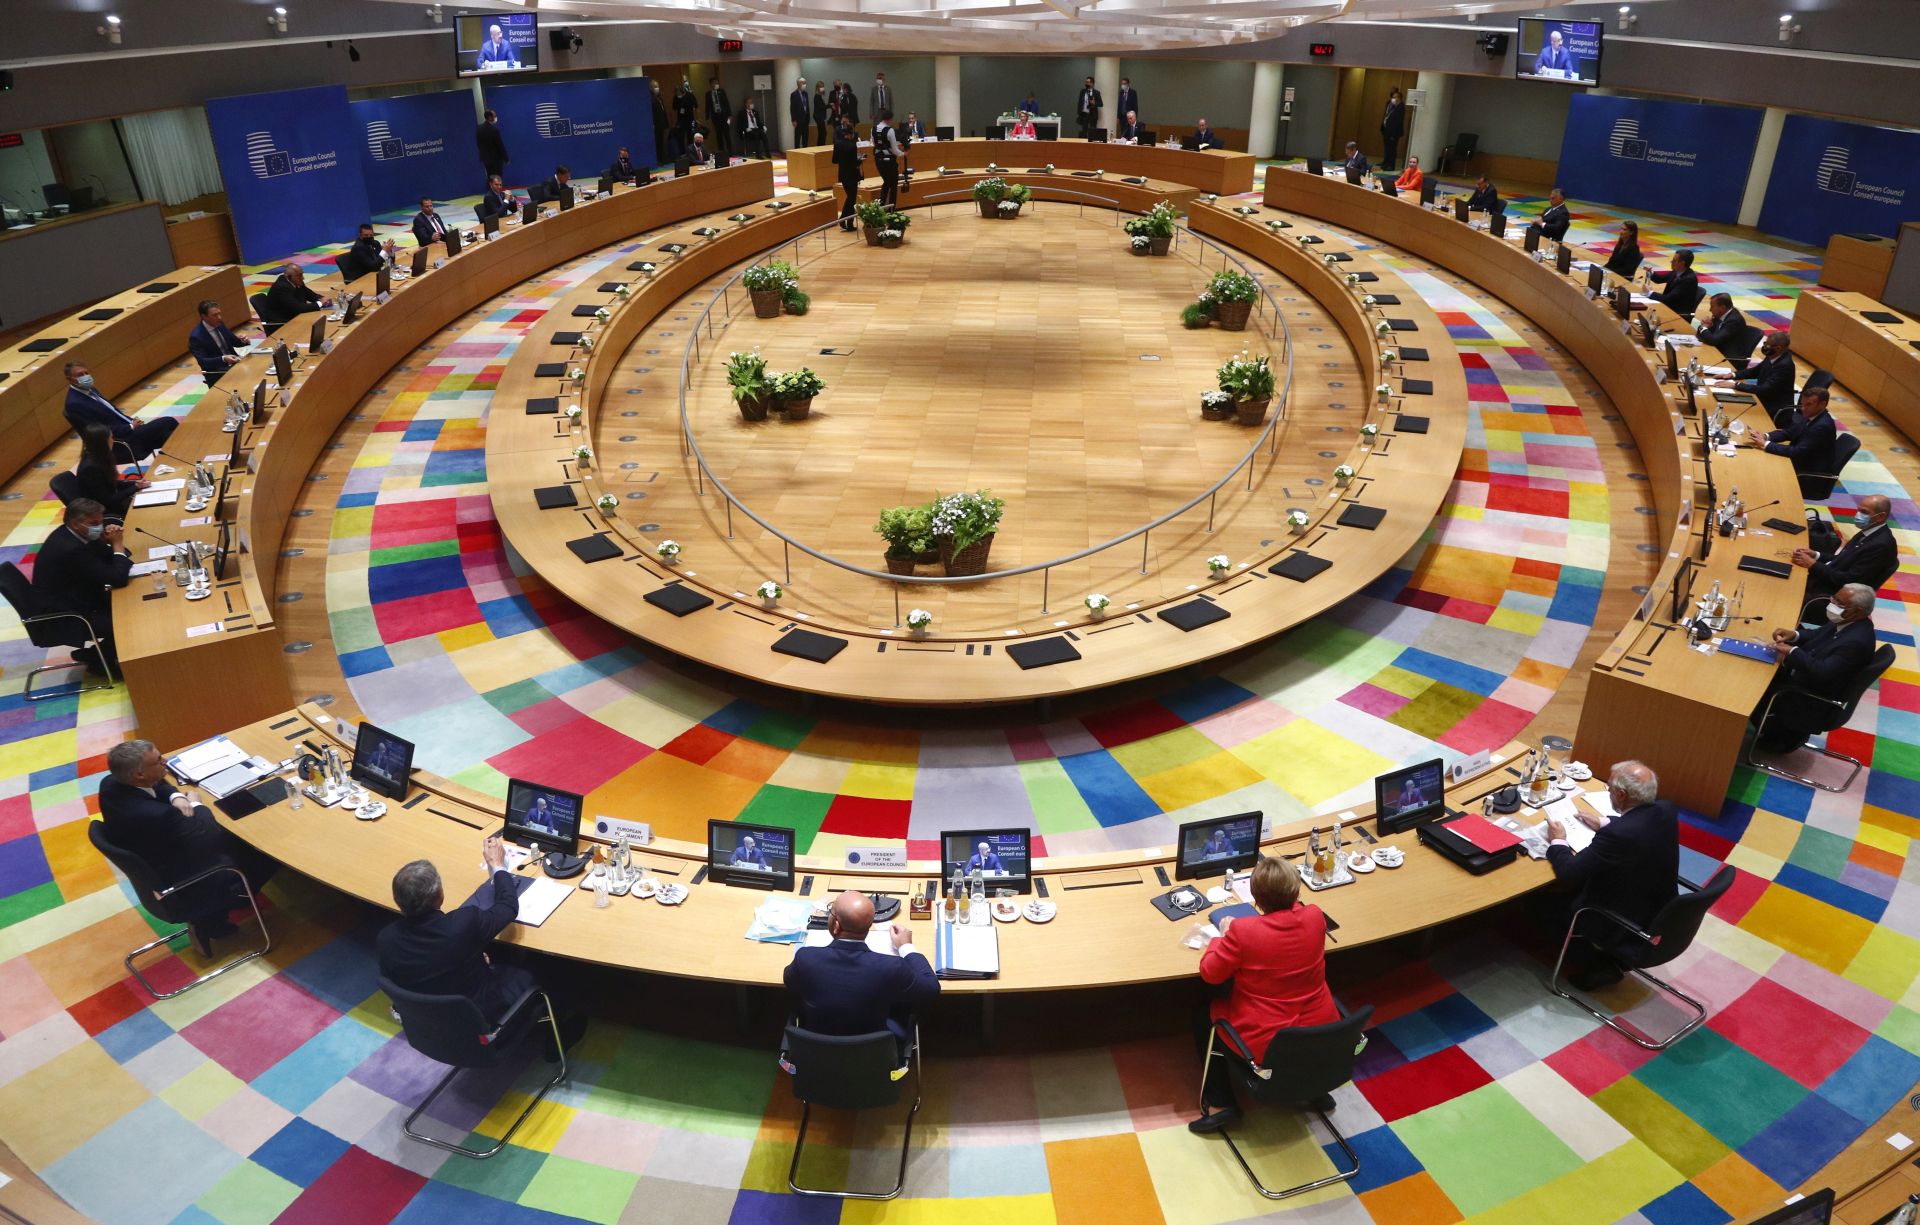 epa08551448 A general view show European Union leader taking part in an EU summit at the European Council building in Brussels, Belgium, 17 July 2020. European Union nations leaders meet face-to-face for the first time since February to discuss plans responding to coronavirus crisis and new long-term EU budget at the special European Council on 17 and 18 July.  EPA/FRANCOIS LENOIR / POOL